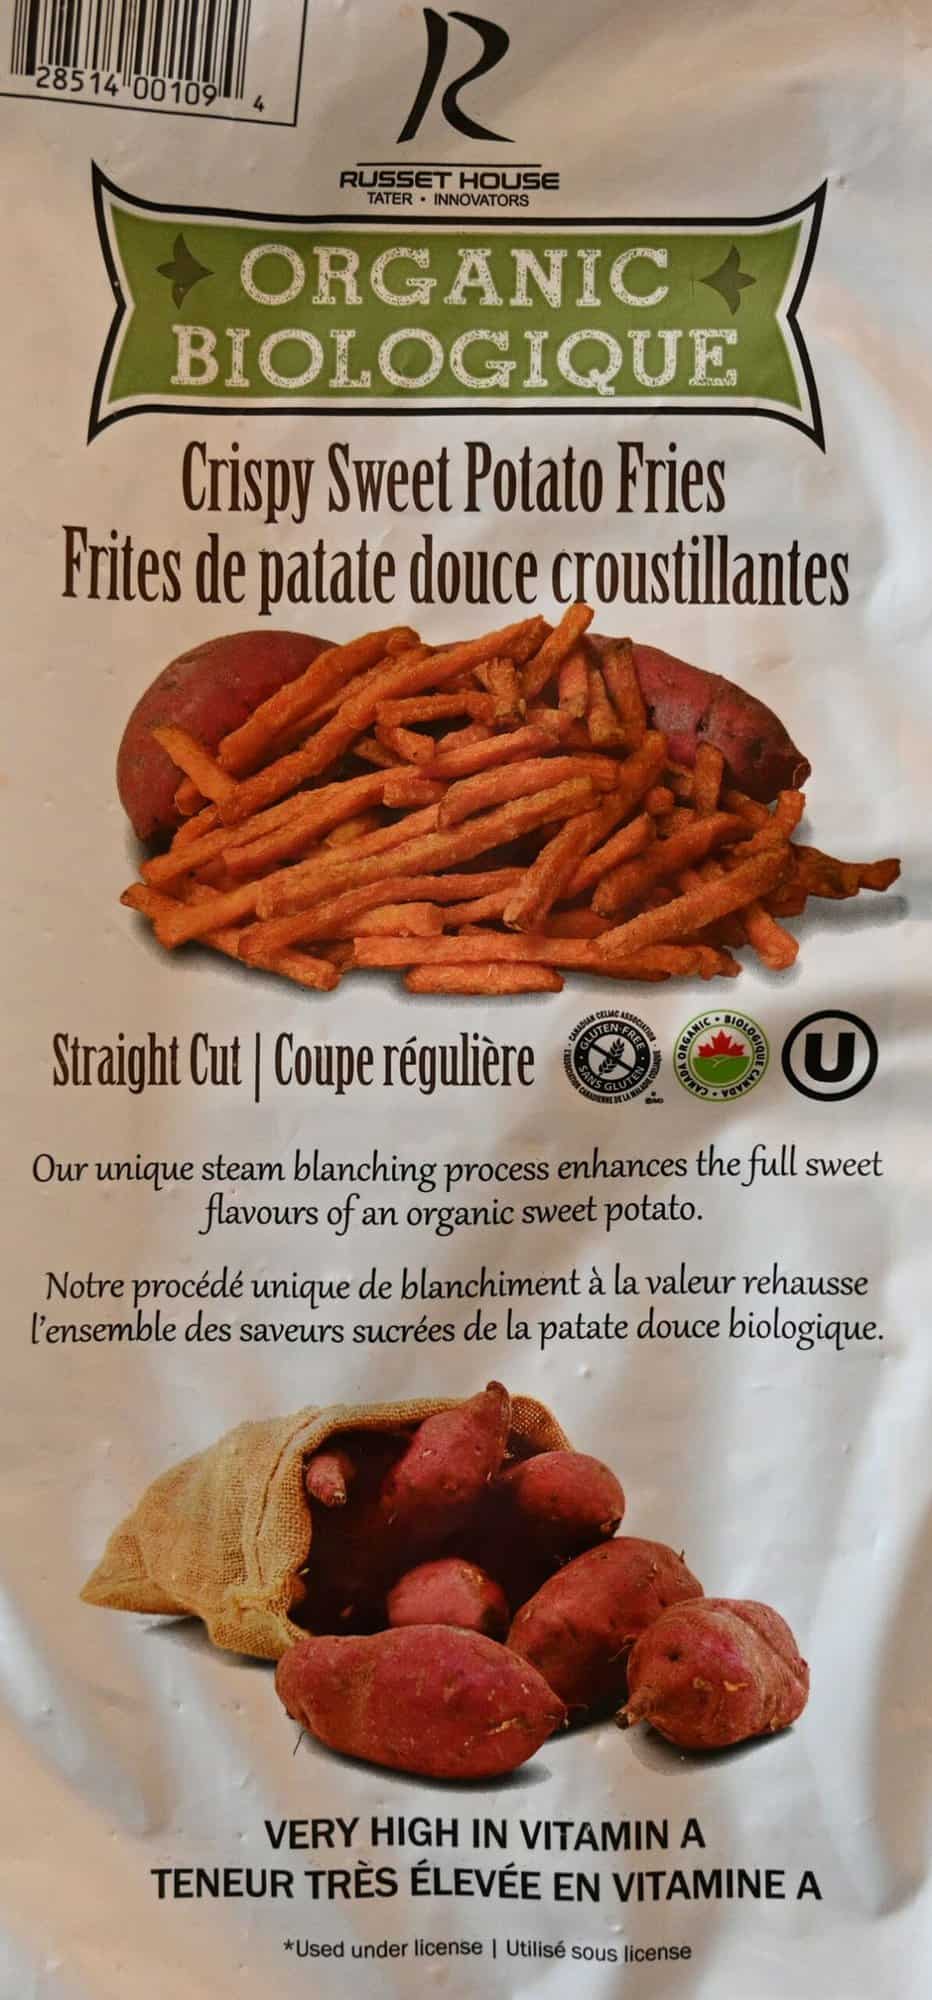 Costco Russet House Sweet Potato Fries product description from the bag. 